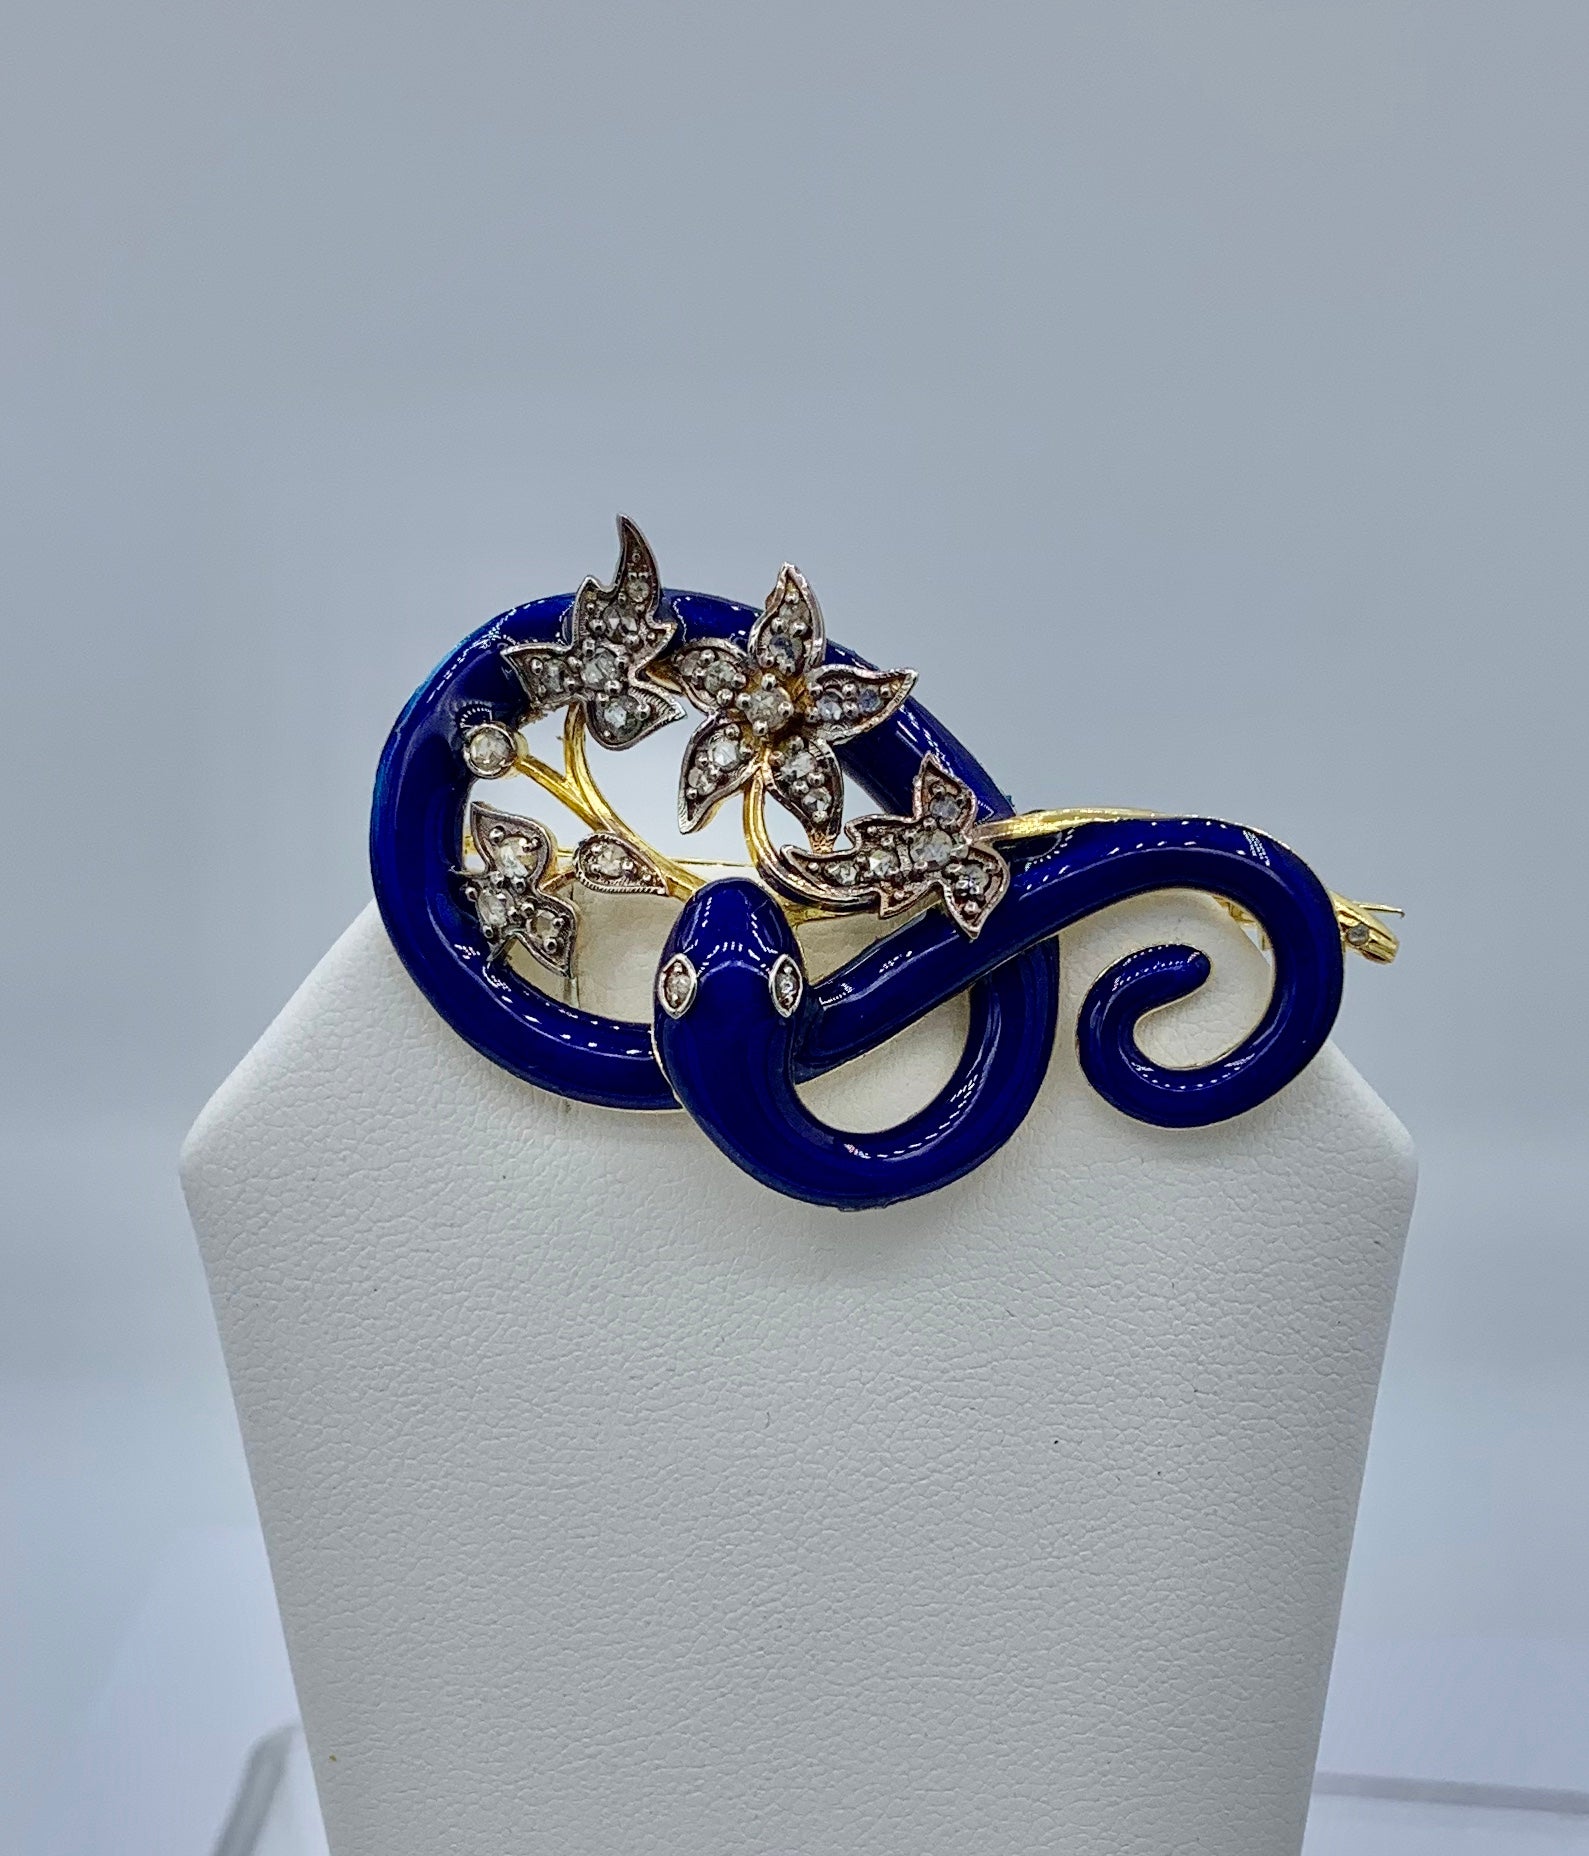 THIS IS A STUNNING SNAKE BROOCH IN THE FORM OF A SNAKE HOLDING DIAMOND ENCRUSTED FLOWERS IN ITS MOUTH.   THE SNAKE IS ADORNED WITH THE MOST STUNNING BASSE-TAILLE ROYAL BLUE ENAMEL.
And snake jewelry is all the rage today.  In the Victorian era the